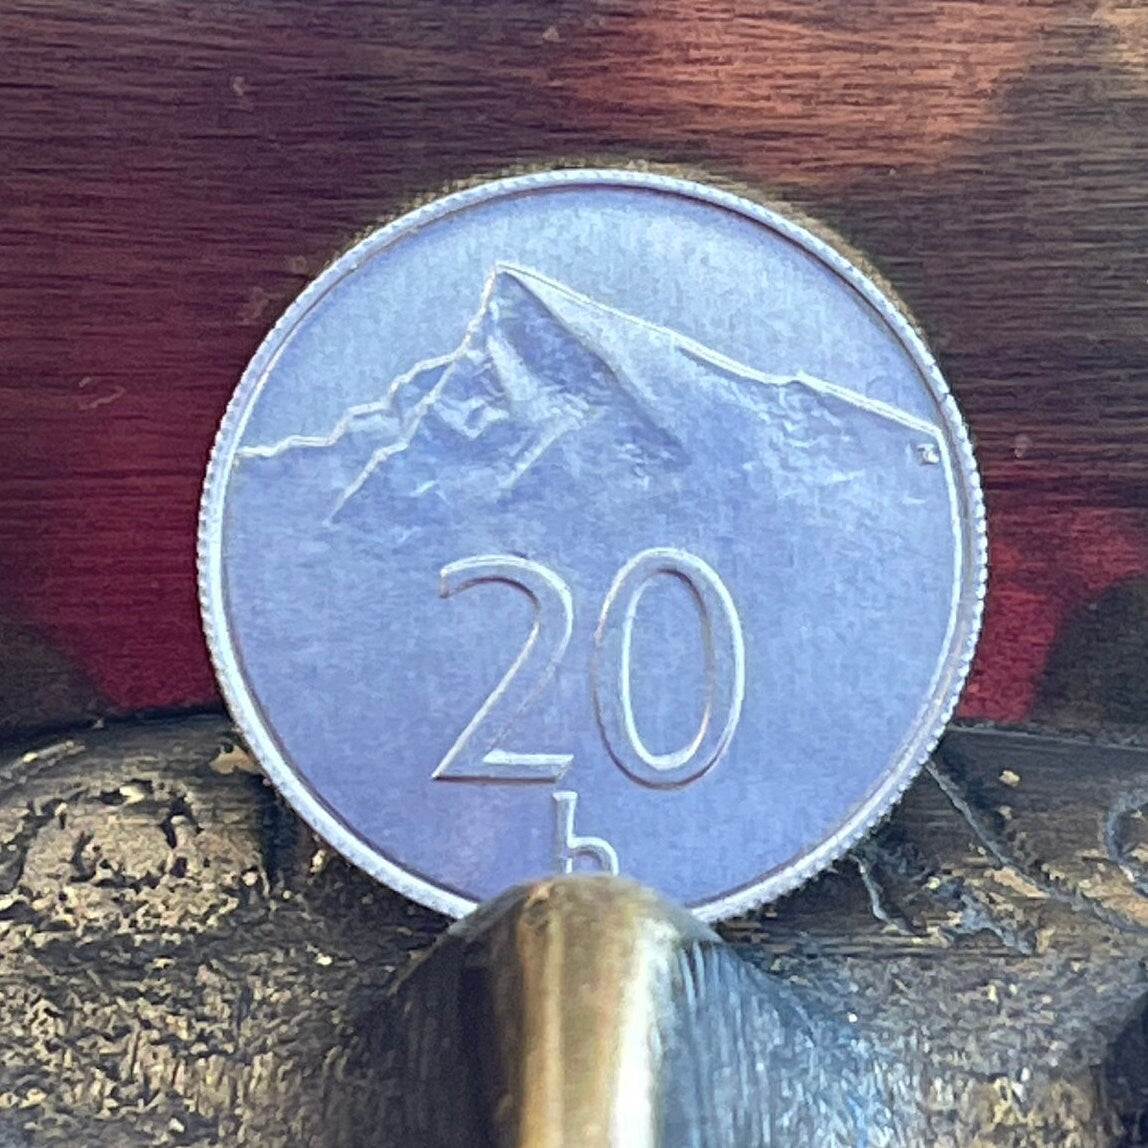 Krivan Mountain Slovak Republic 20 Halierov Authentic Coin Money for Jewelry and Craft Making (Hiking, Mountaineering)